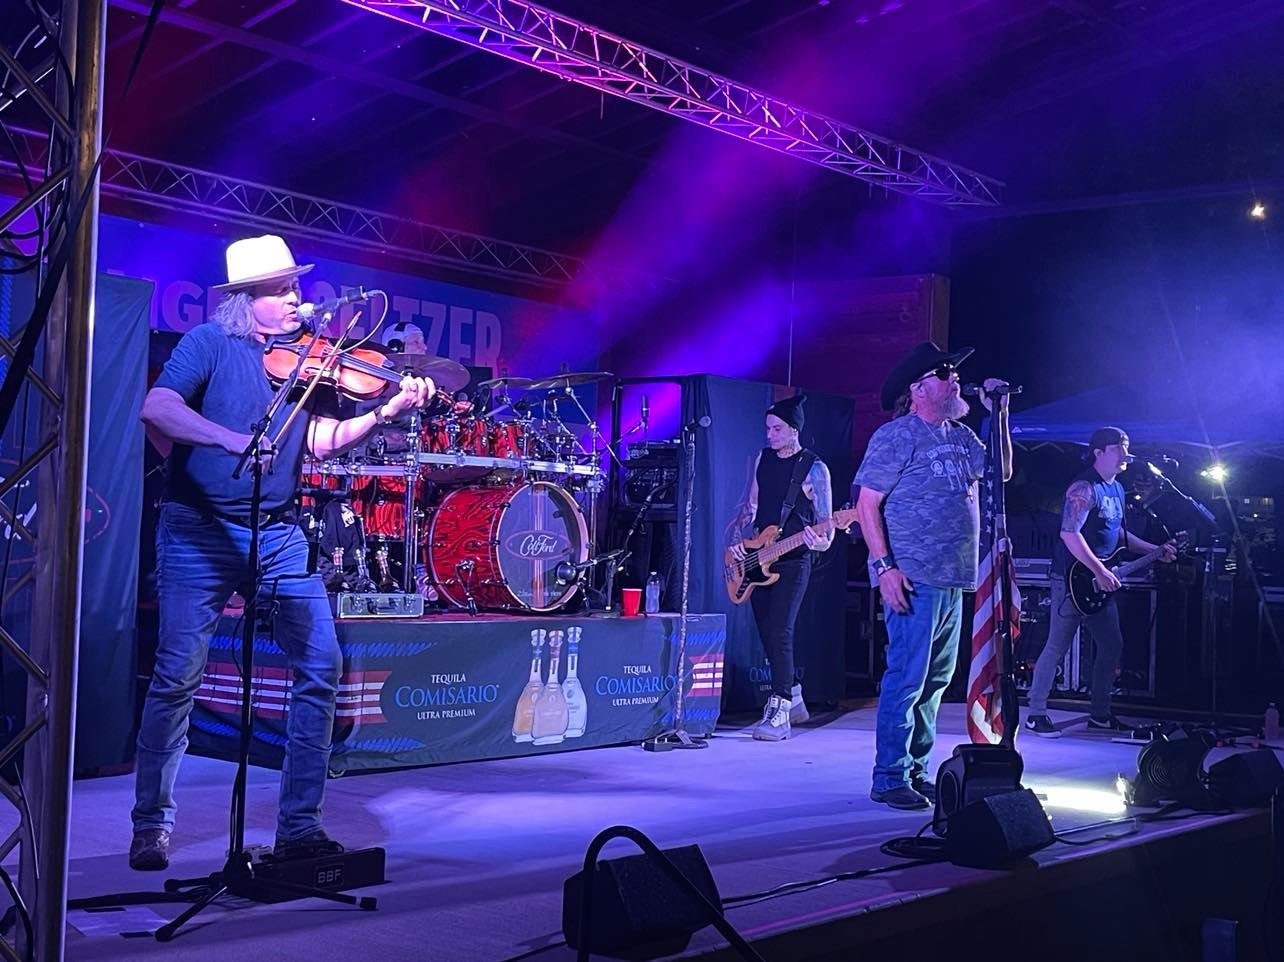 Justin David was first shot to fame through the tv show, Nashville Star, where he showcased his fiddle, mandolin and vocal skills. David is pictured left, performing alongside Colt Ford.